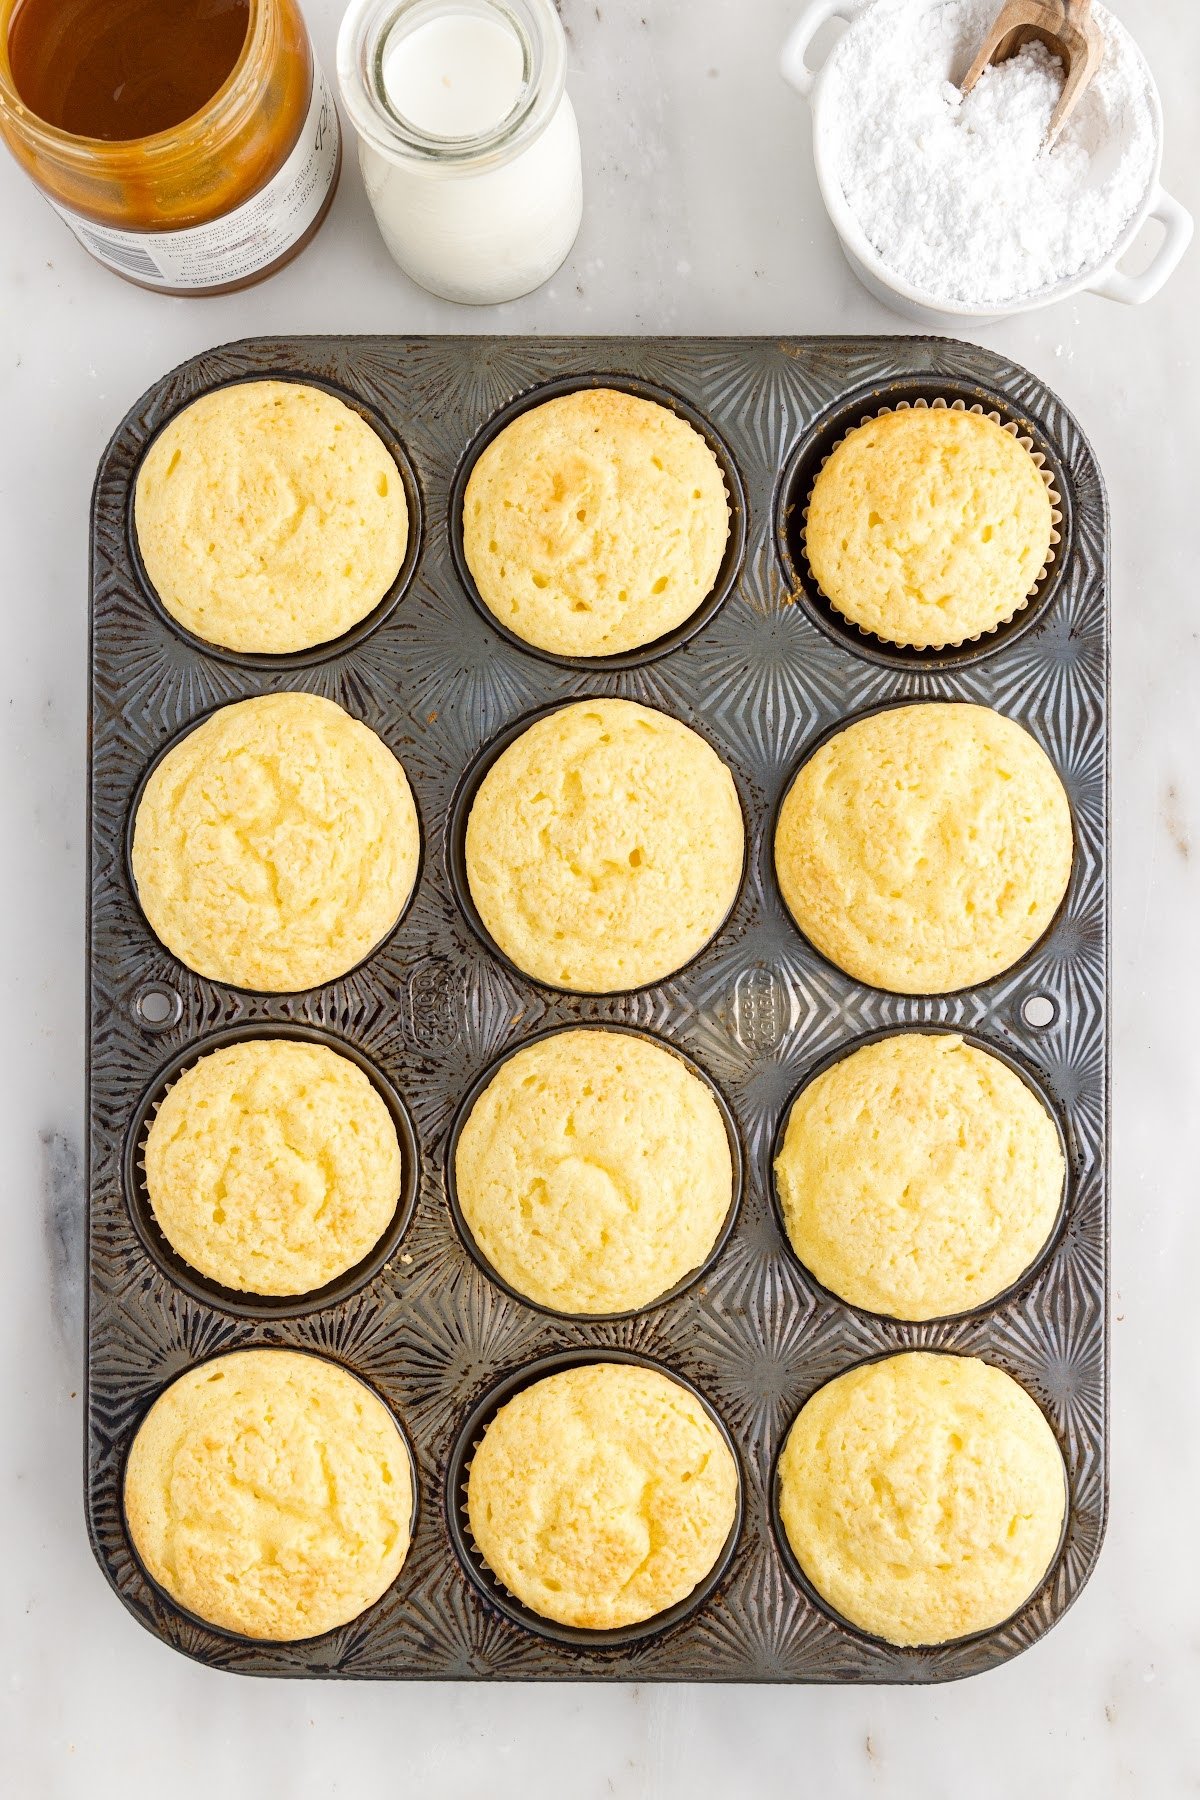 Fully baked cupcakes.